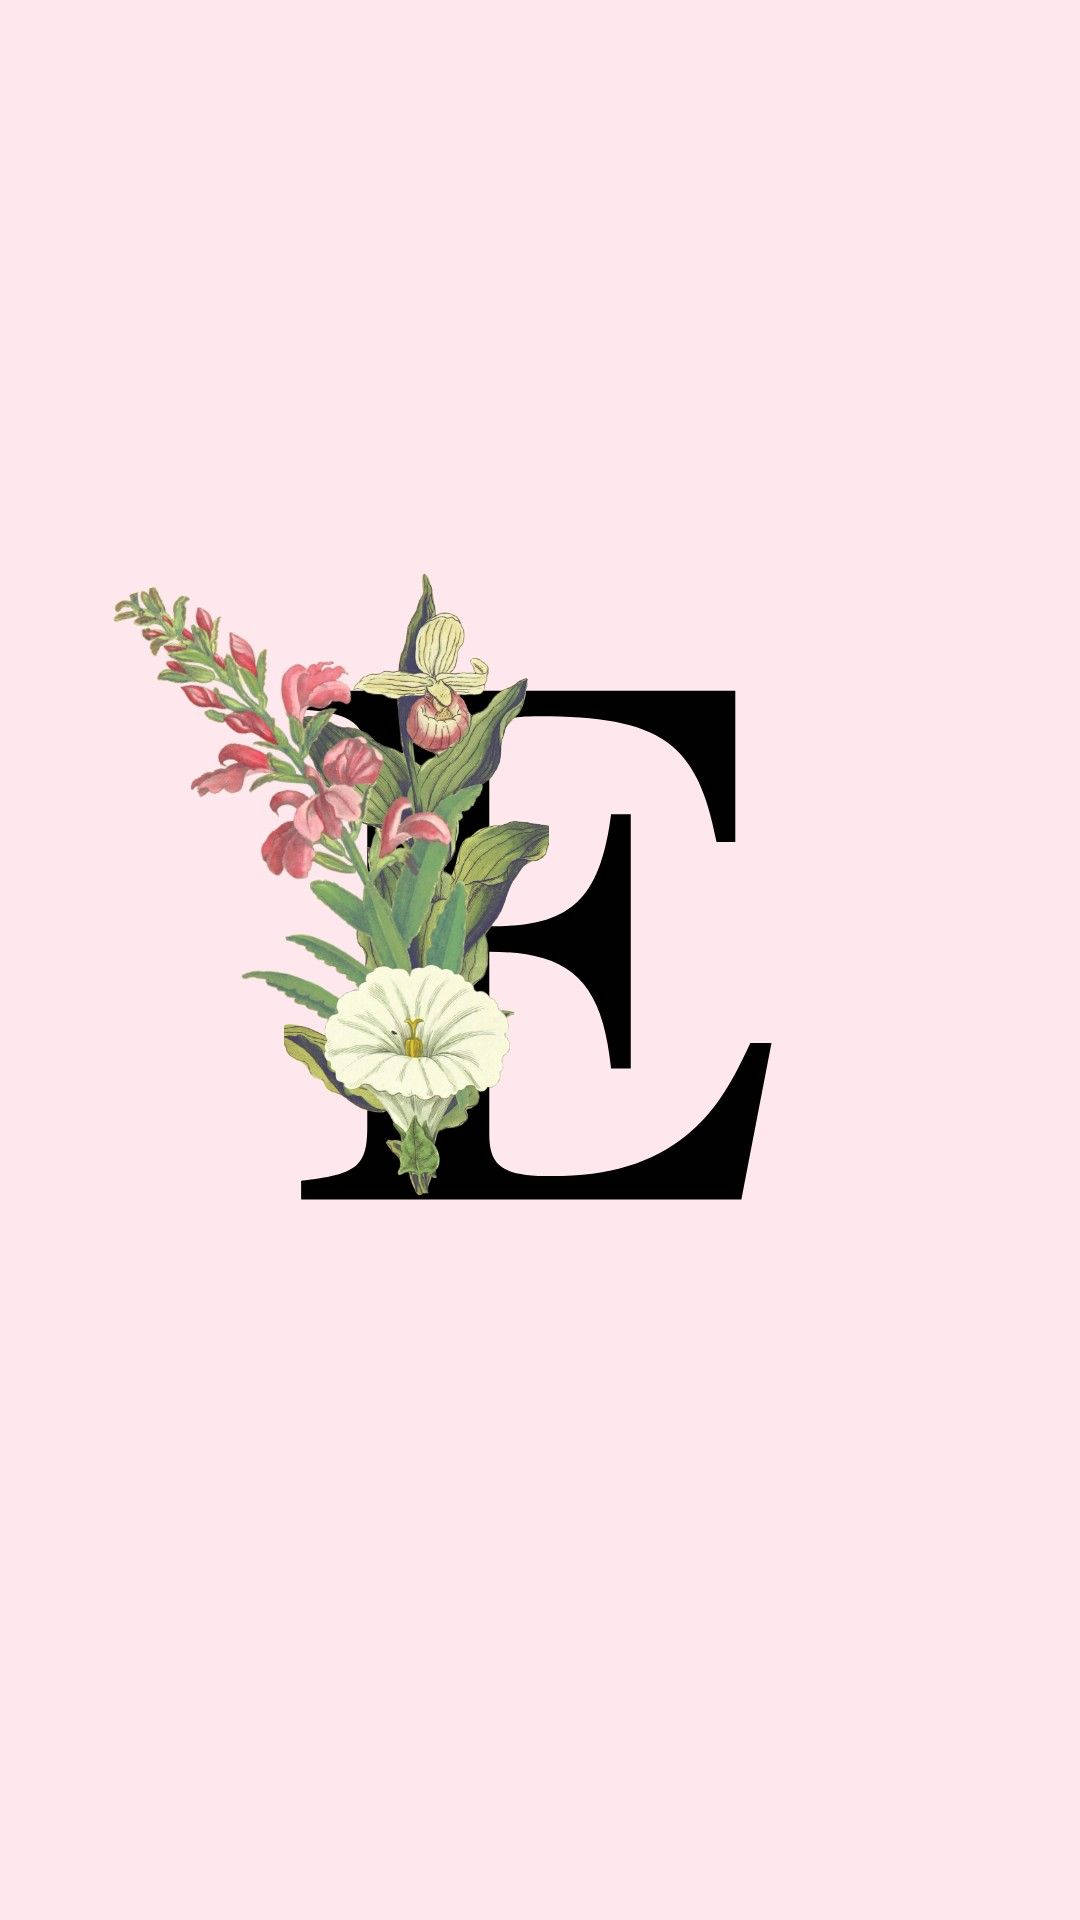 Black Letter E With Flowers Background